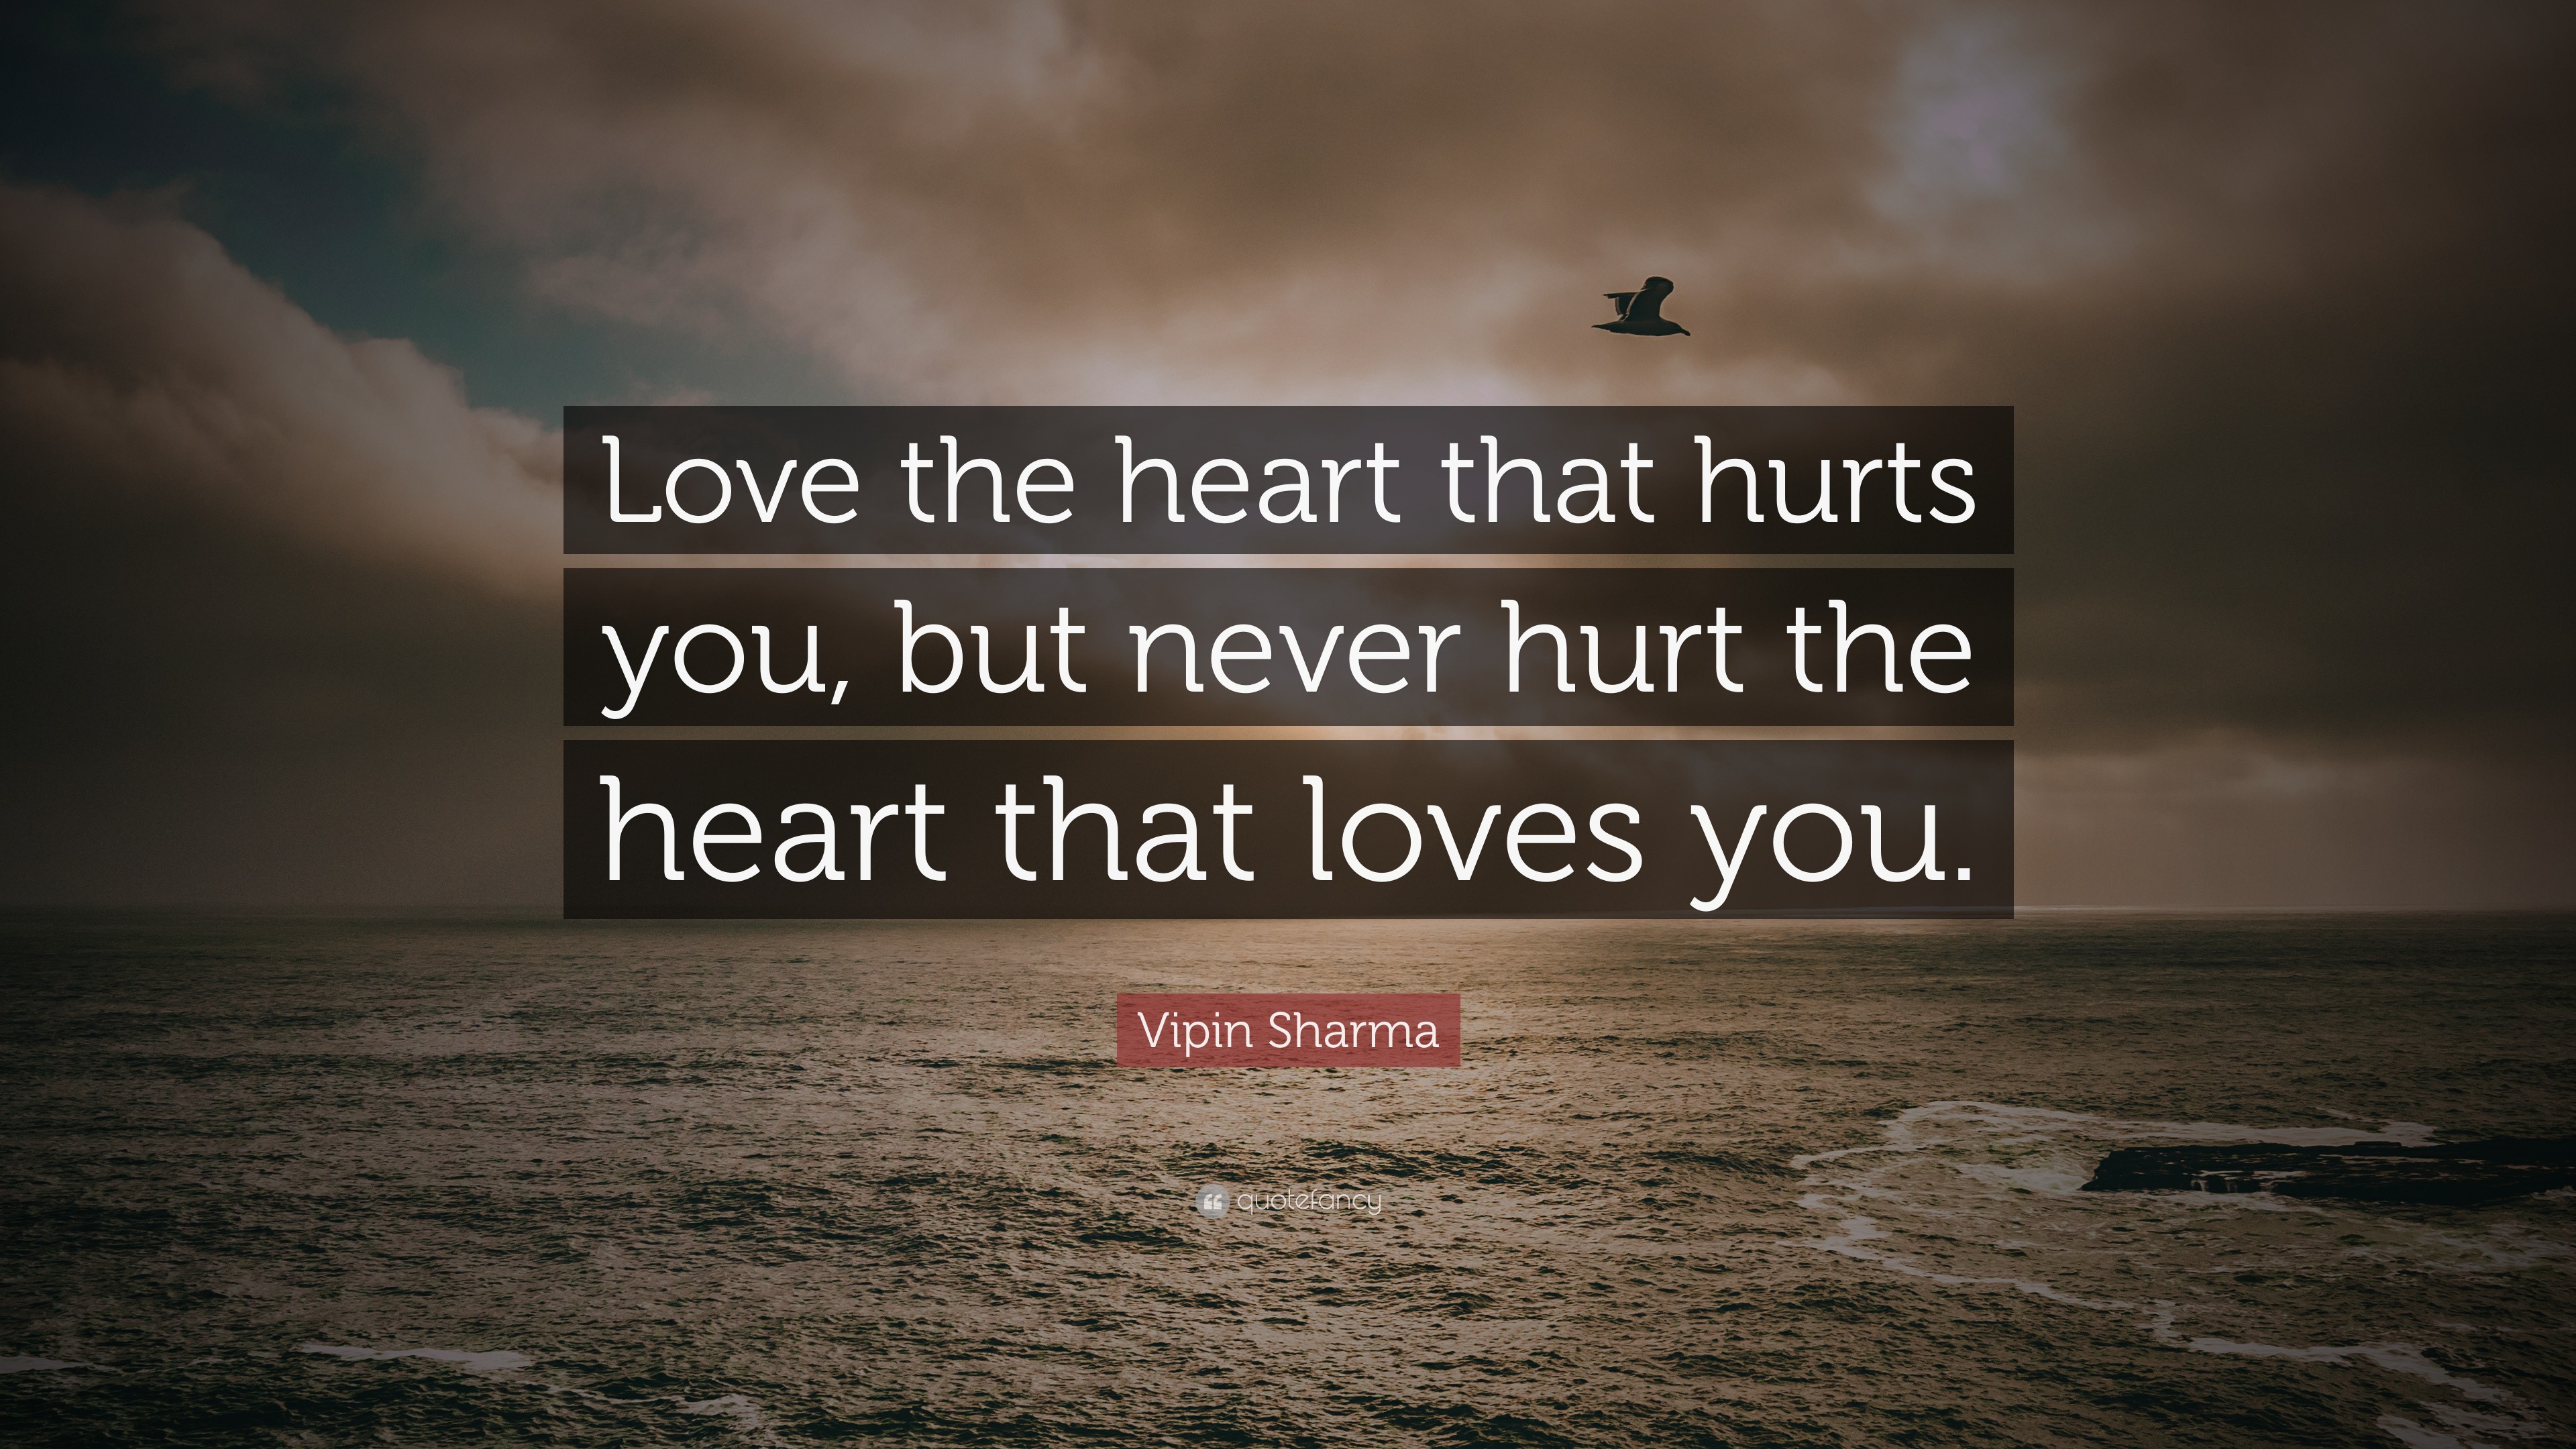 Vipin Sharma Quote “Love the heart that hurts you but never hurt the